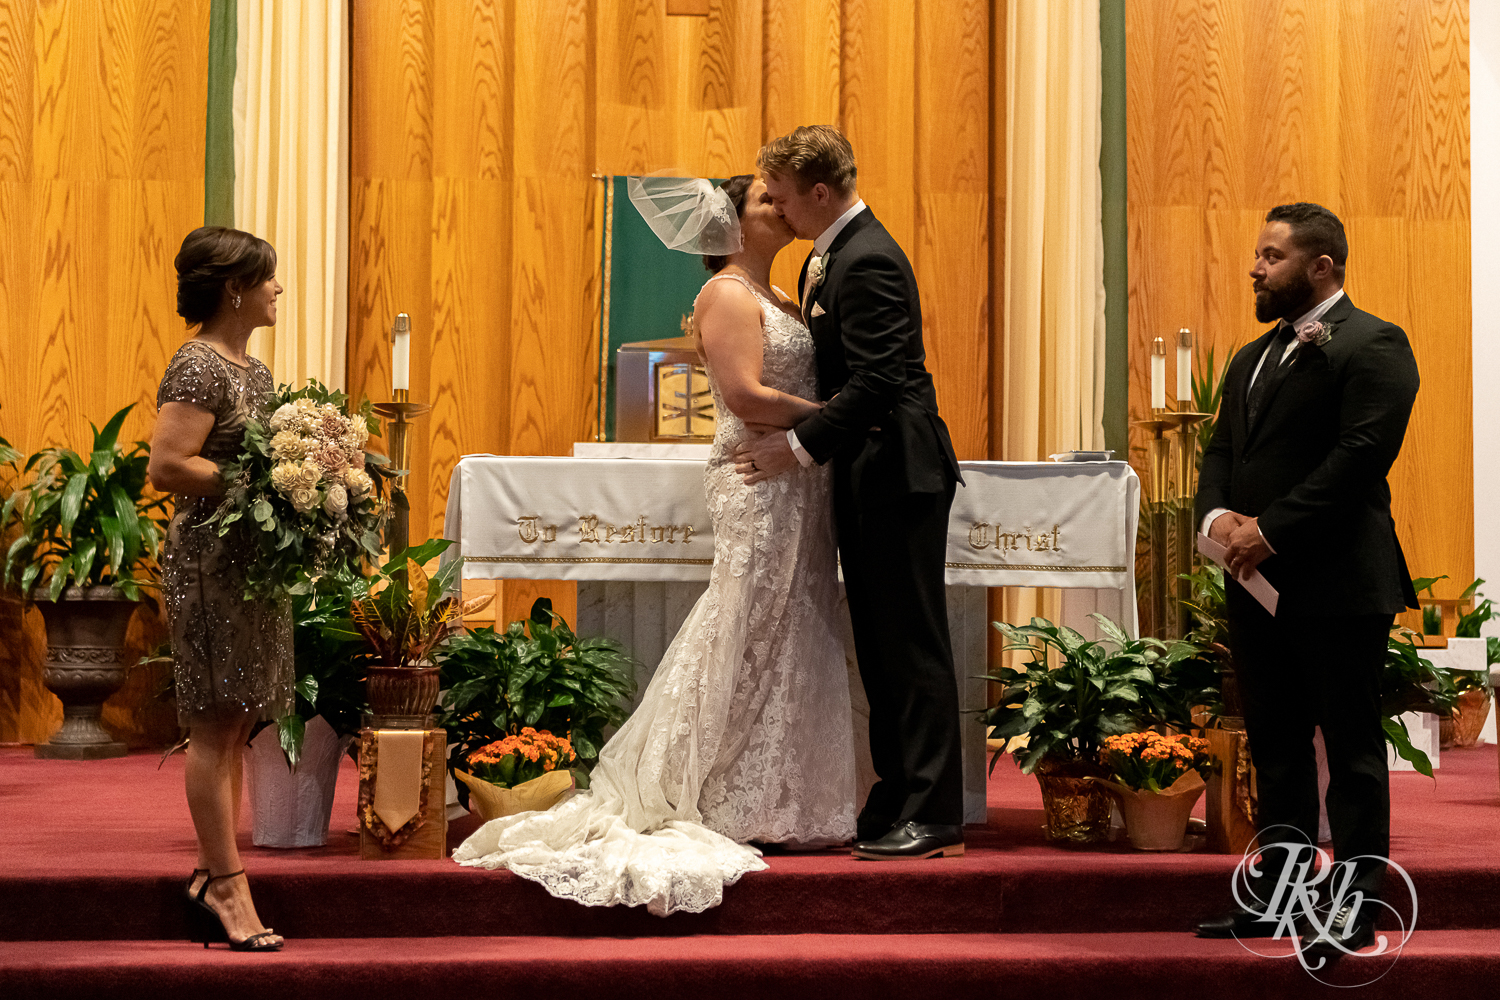 Bride and groom kiss each other at a church wedding ceremony in Stillwater, Minnesota.